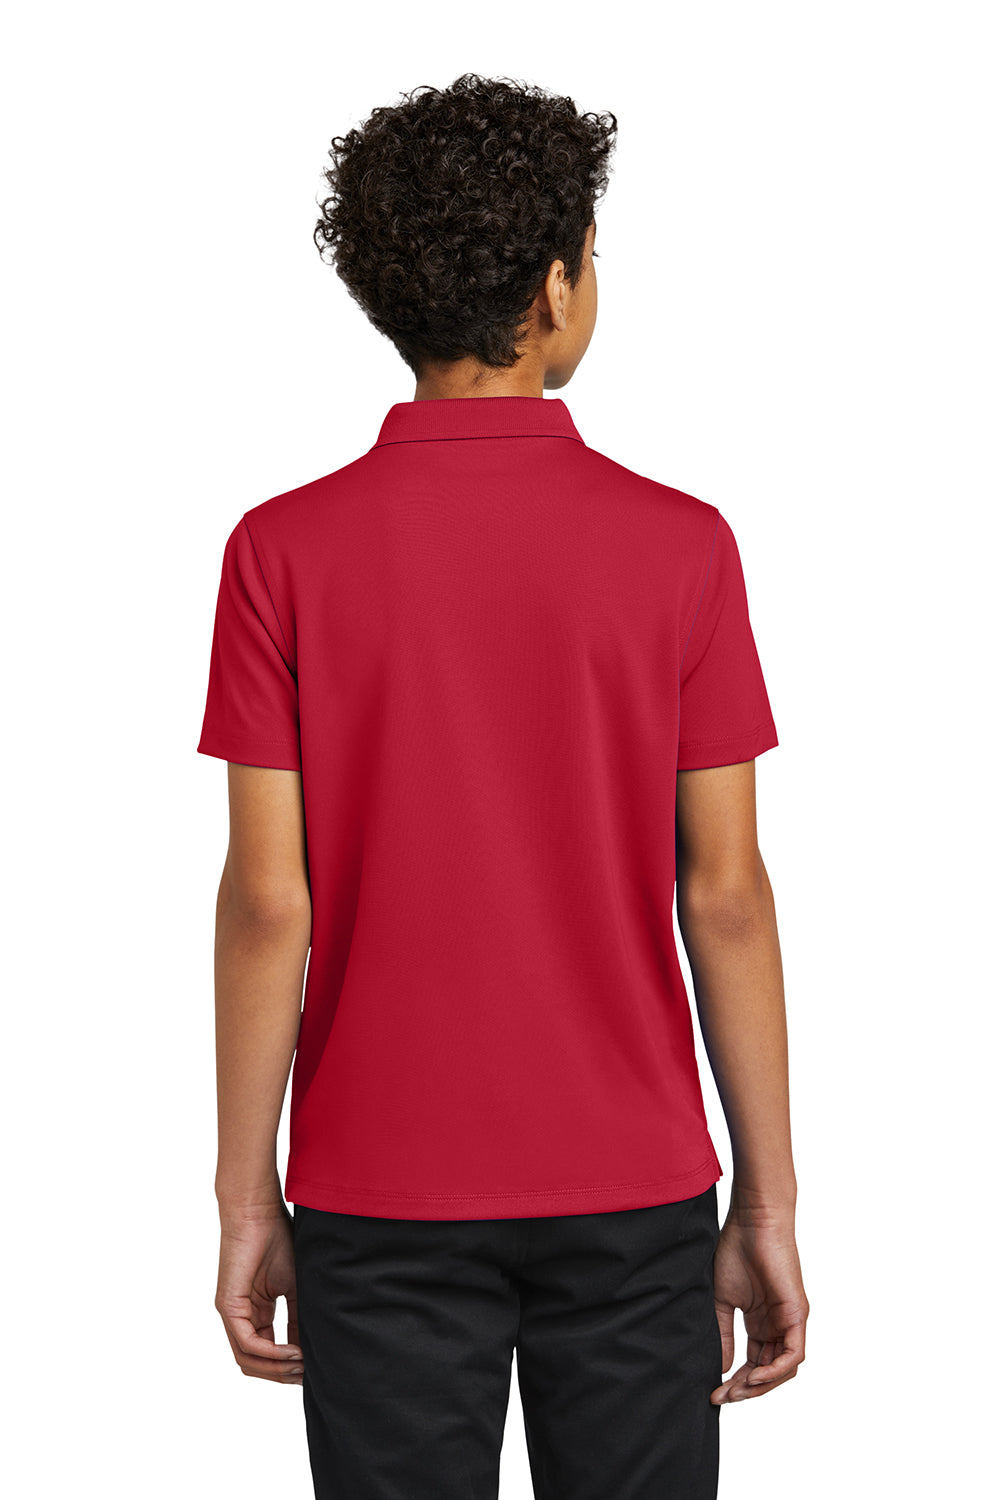 Port Authority Y110 Youth Dry Zone Moisture Wicking Short Sleeve Polo Shirt Rich Red Back